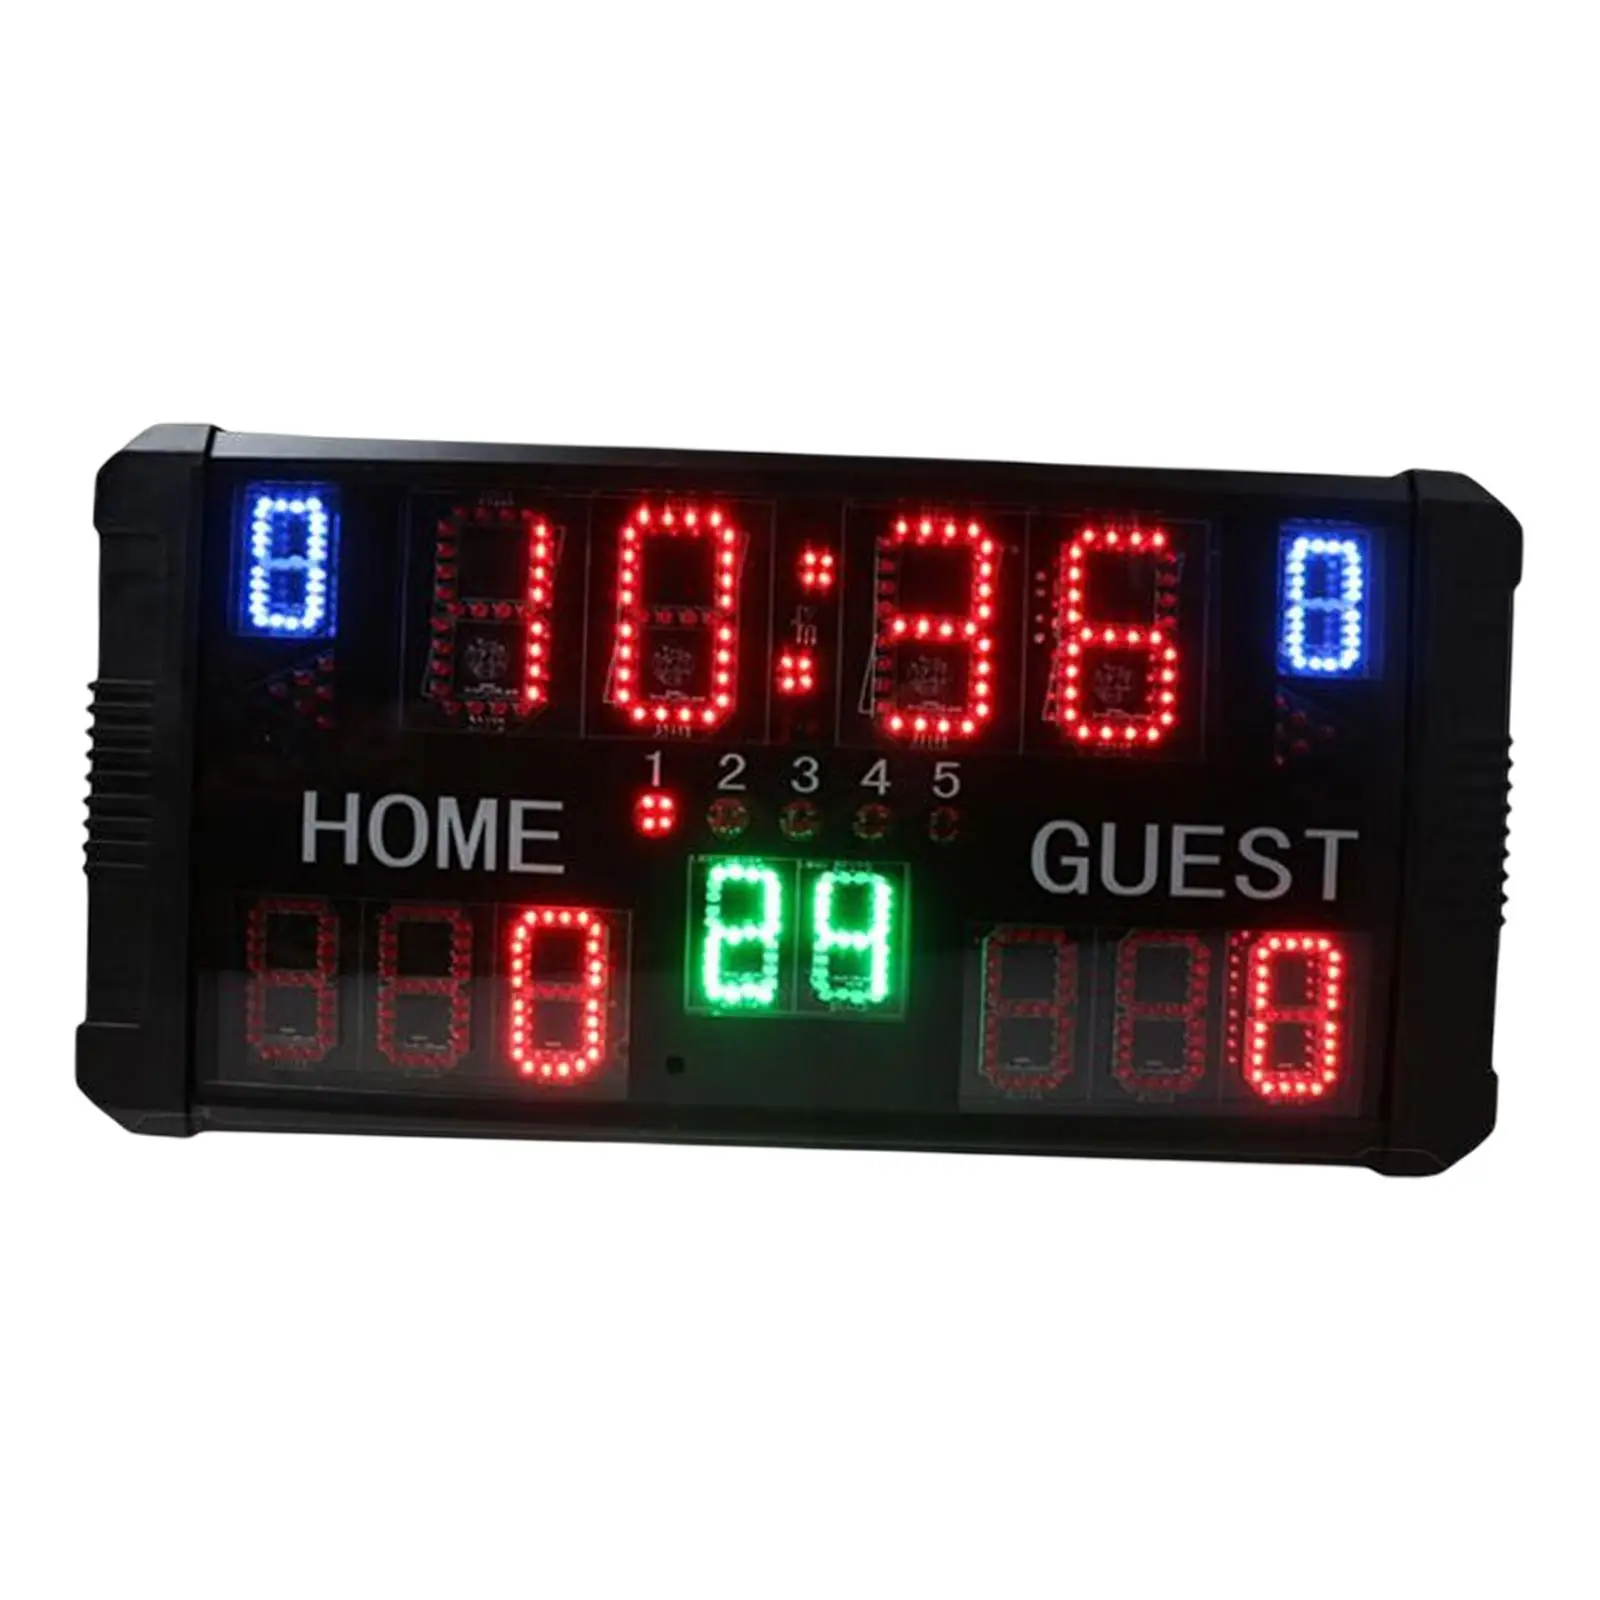 Professional Indoor Basketball Scoreboard Score Innings Timer Time Electronic Digital Scoreboard for Volleyball Tabletop Tennis